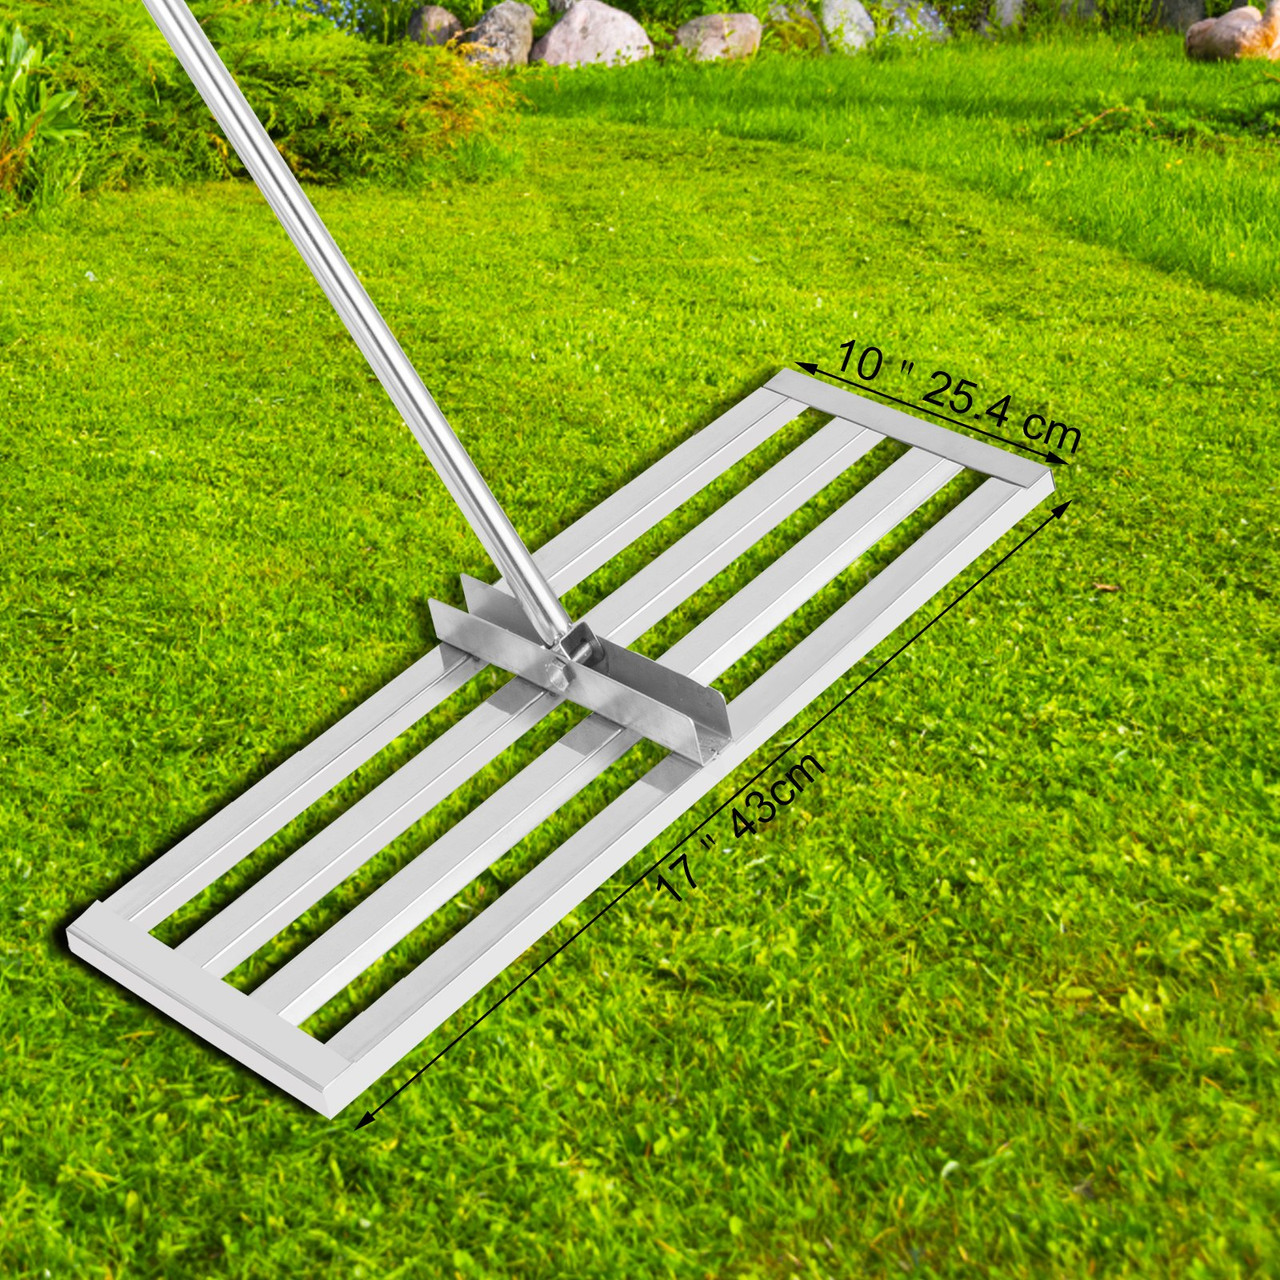 Lawn Leveler Tool 17 x 10 in, Lawn Leveling Rake with 77 in Long Handle, Soil Leveling Tool Stainless Steel, Leveling Soil Dirt or Sand Ground Surface for Yard Garden Ground and Golf Lawn